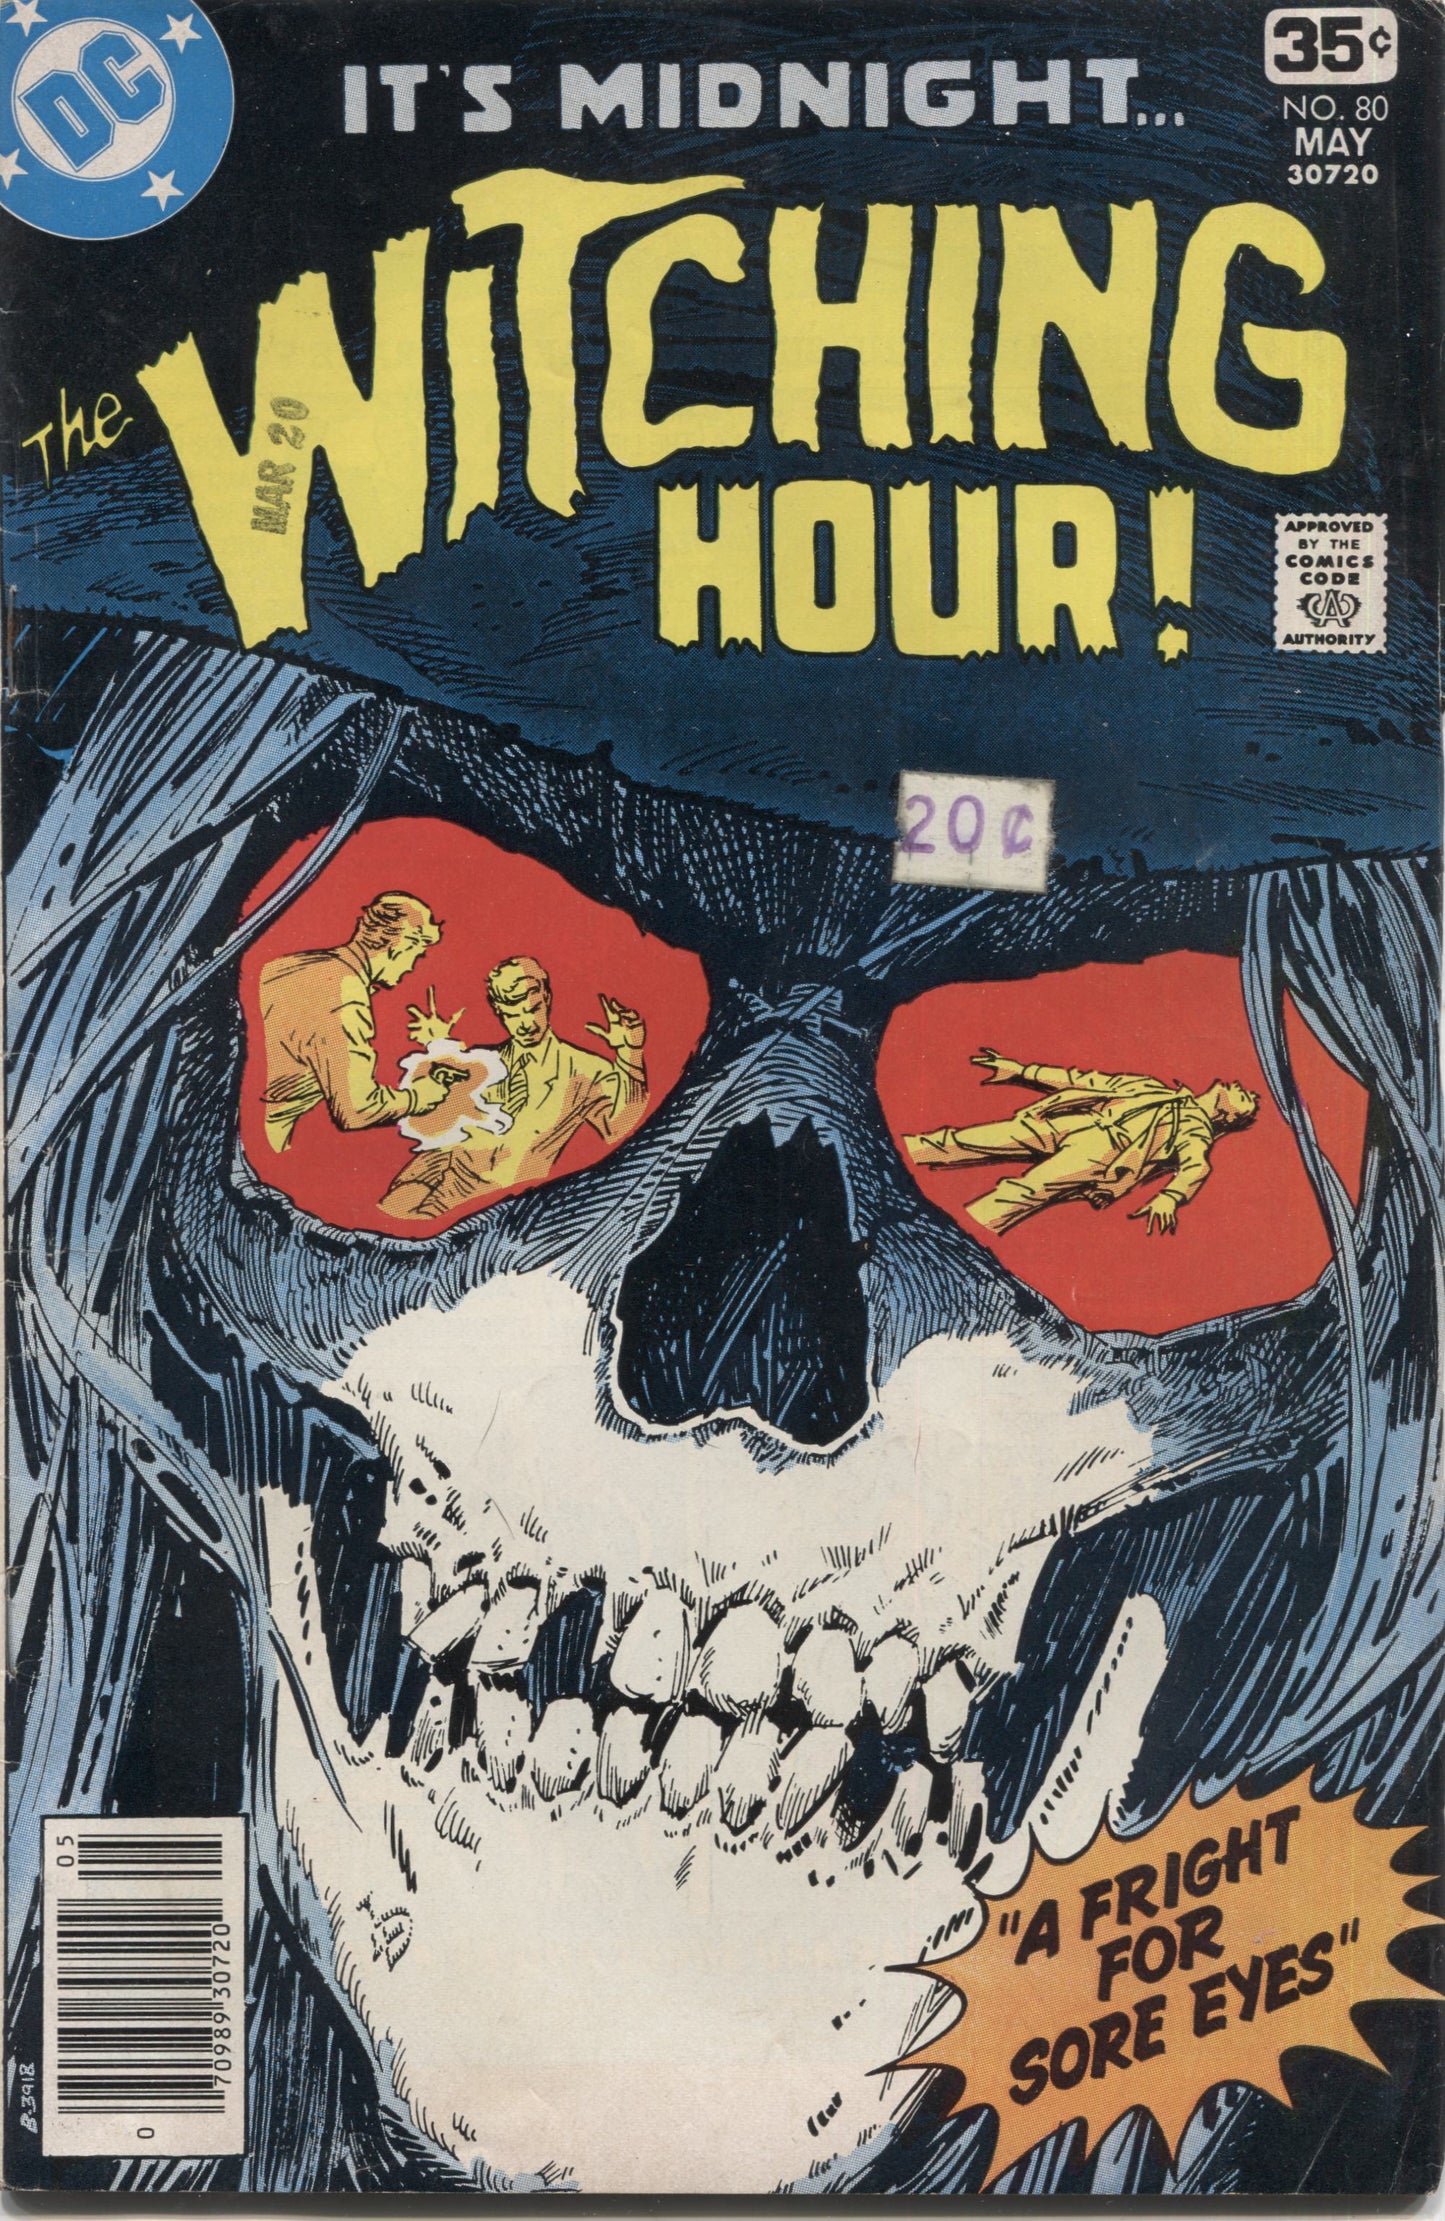 The Witching Hour No. 80, "A Fright For Sore Eyes," DC Comics, May 1978